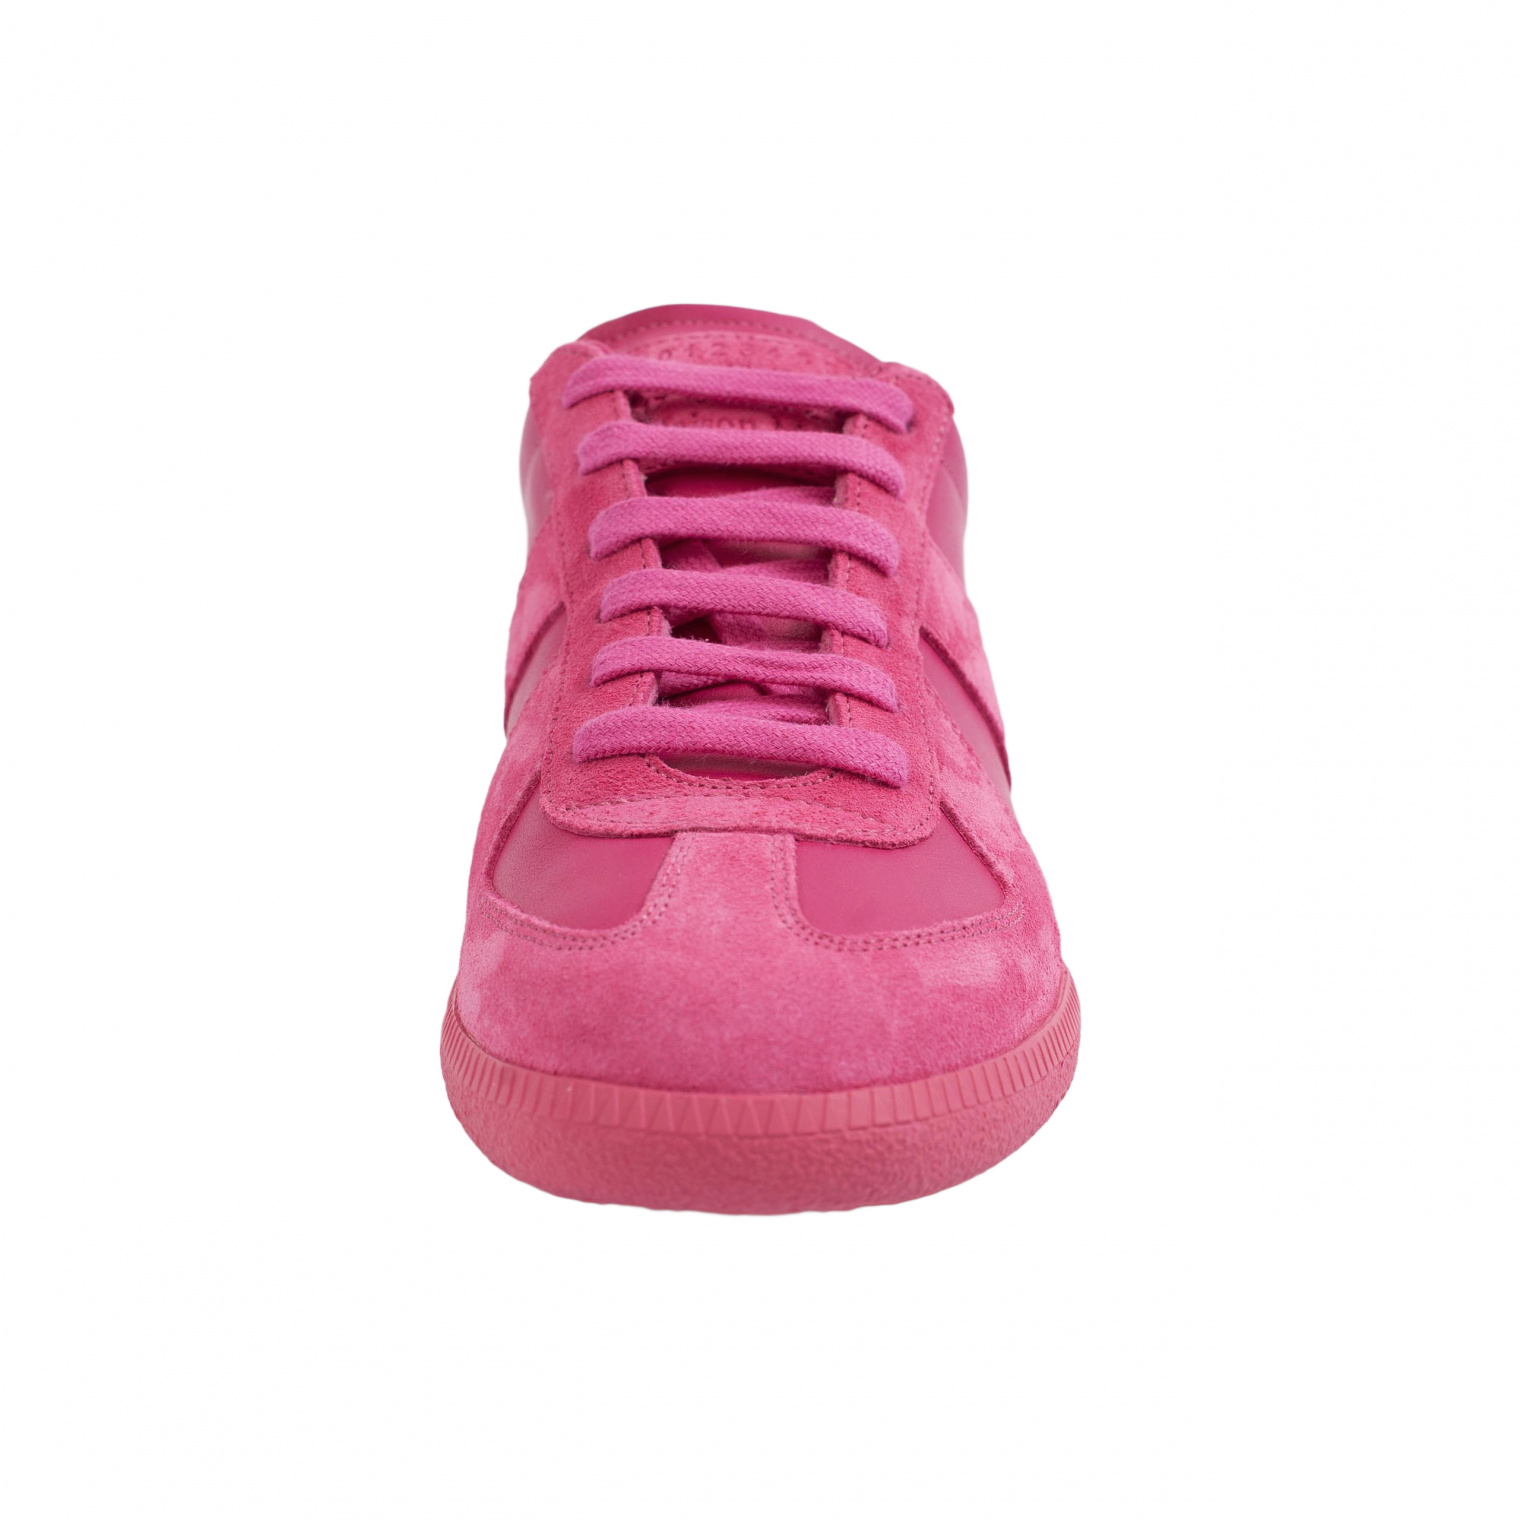 Maison Margiela Pink Leather Replica Sneakers